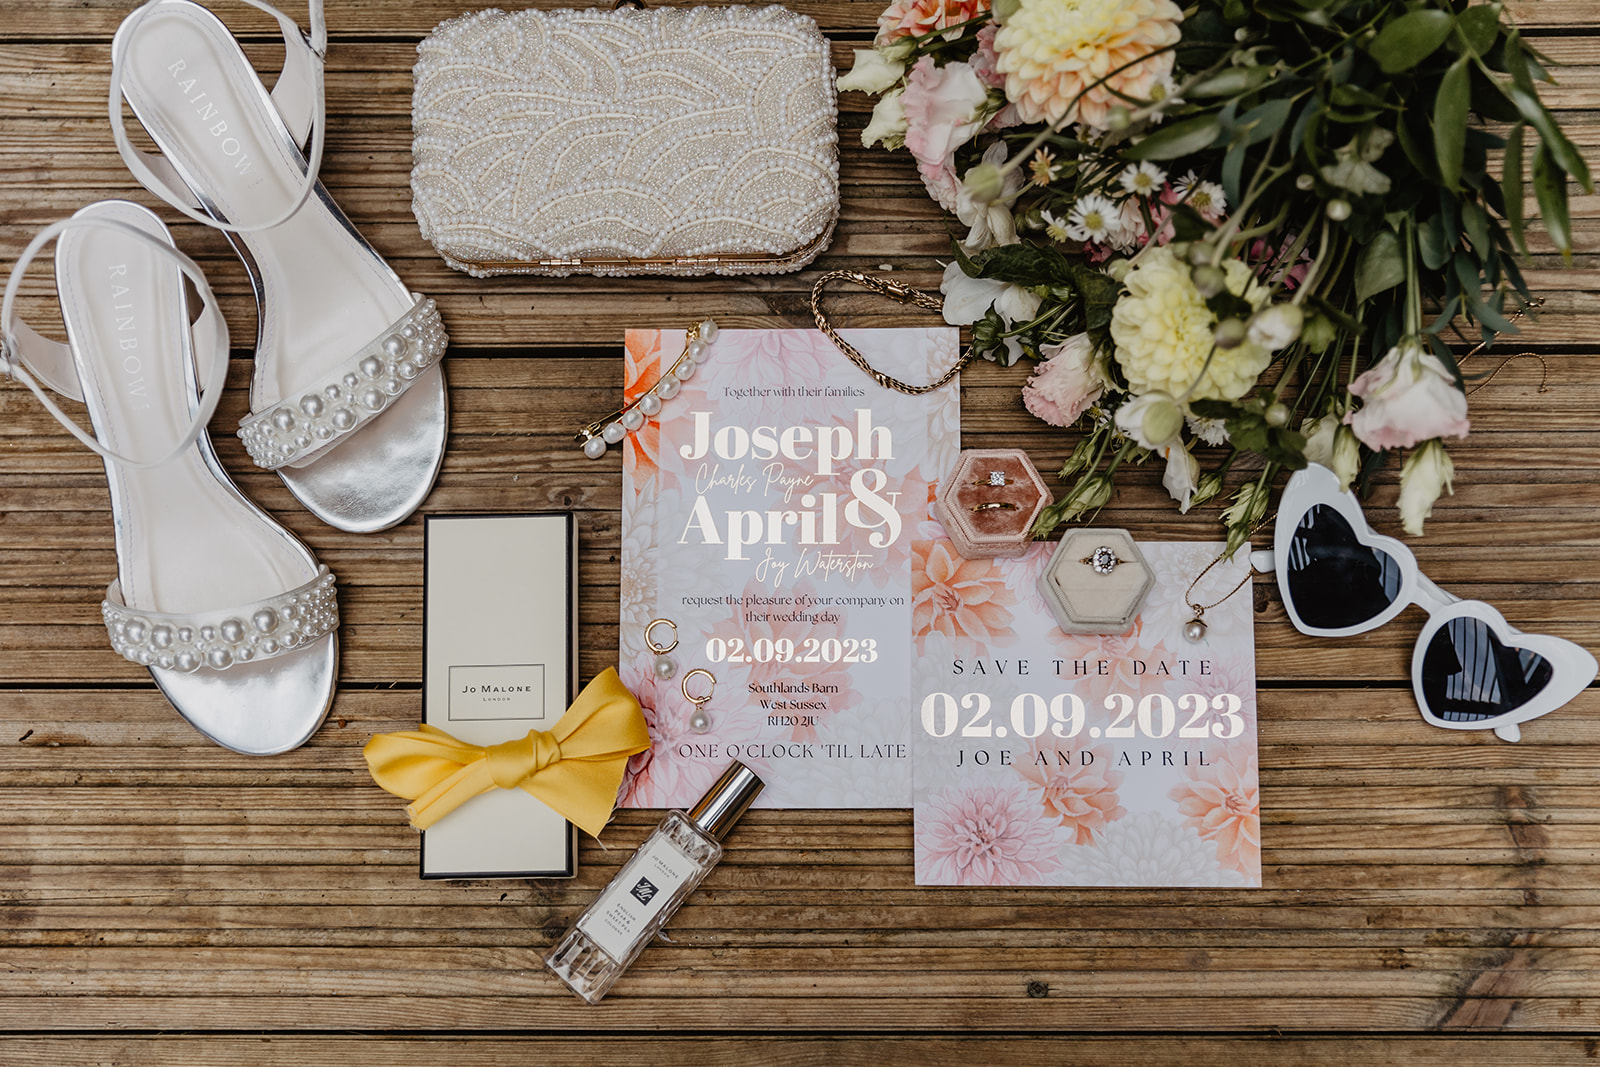 Bride accessory flatlay at a Southlands barn wedding, Sussex. Photo by OliveJoy Photography.